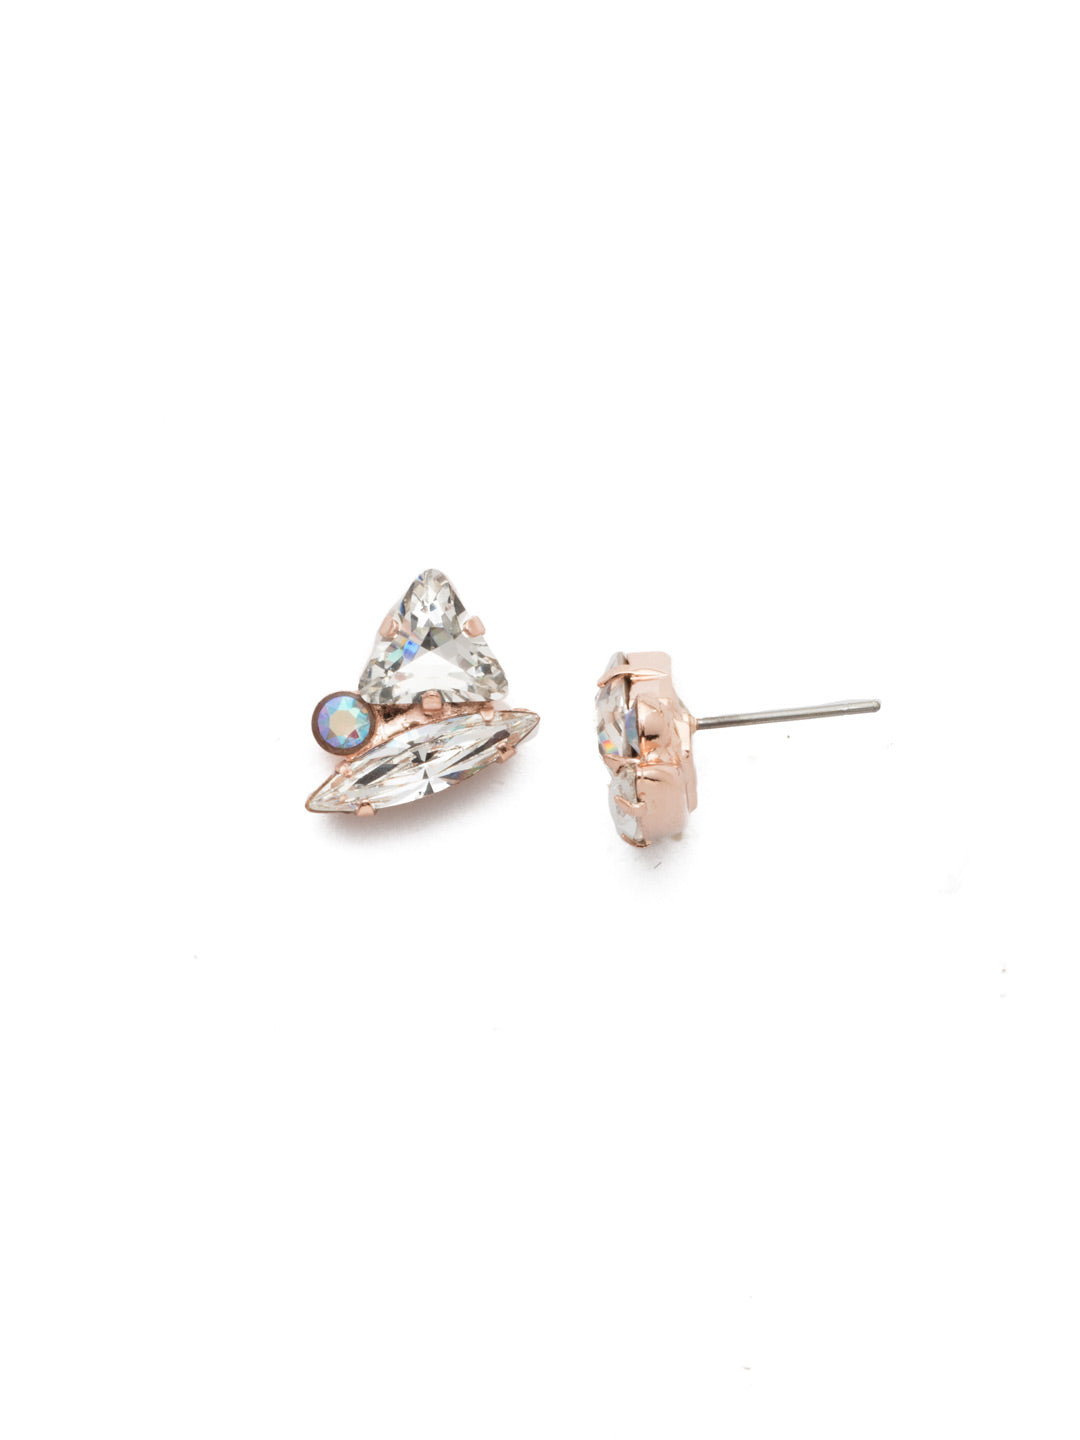 EEN16 Stud Earrings - EEN16RGROG - <p>These Stud Earrings have you covered when you can't commit to just one crystal shape. The triangle, navette and delicate circular stones come together perfectly. From Sorrelli's Rose Garden  collection in our Rose Gold-tone finish.</p>